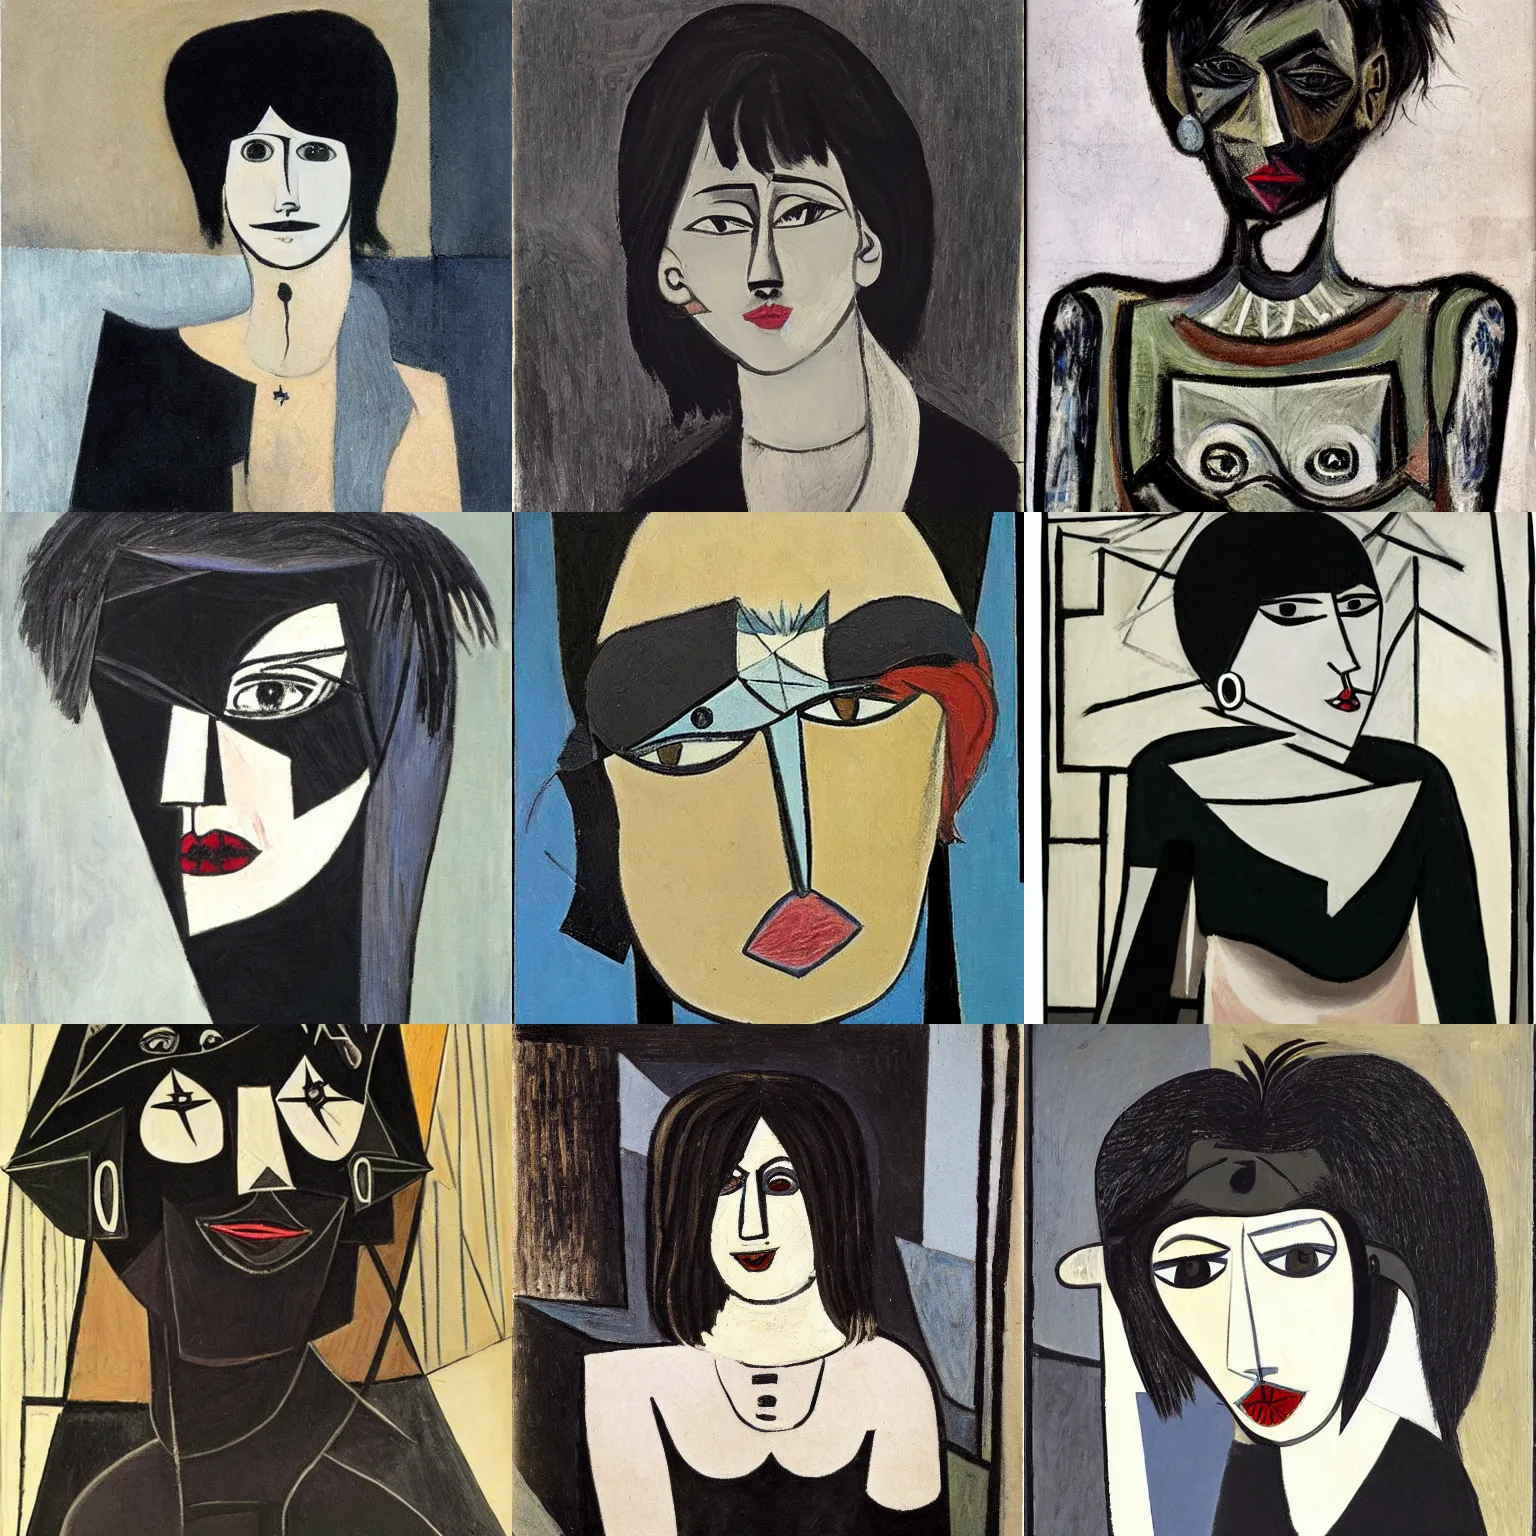 Prompt: an emo portrait painted by pablo picasso. her hair is dark brown and cut into a short, messy pixie cut. she has large entirely - black evil eyes. she is wearing a black tank top, a black leather jacket, a black knee - length skirt, a black choker, and black leather boots.